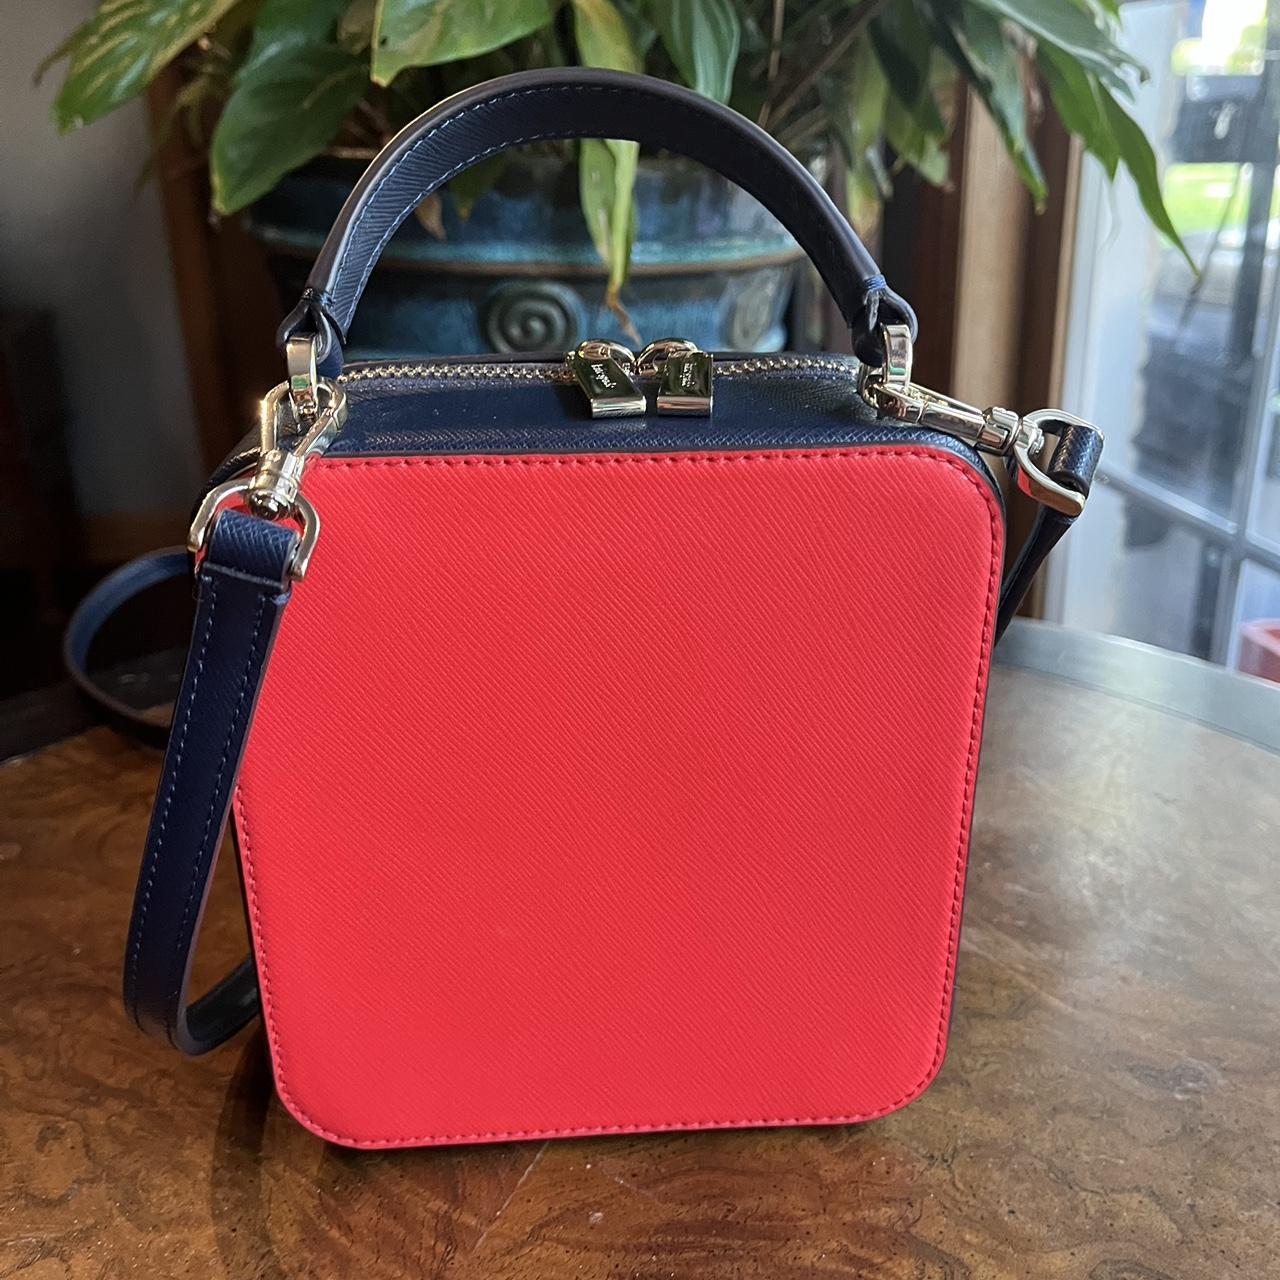 How Much Is a Kate Spade Purse? | LoveToKnow